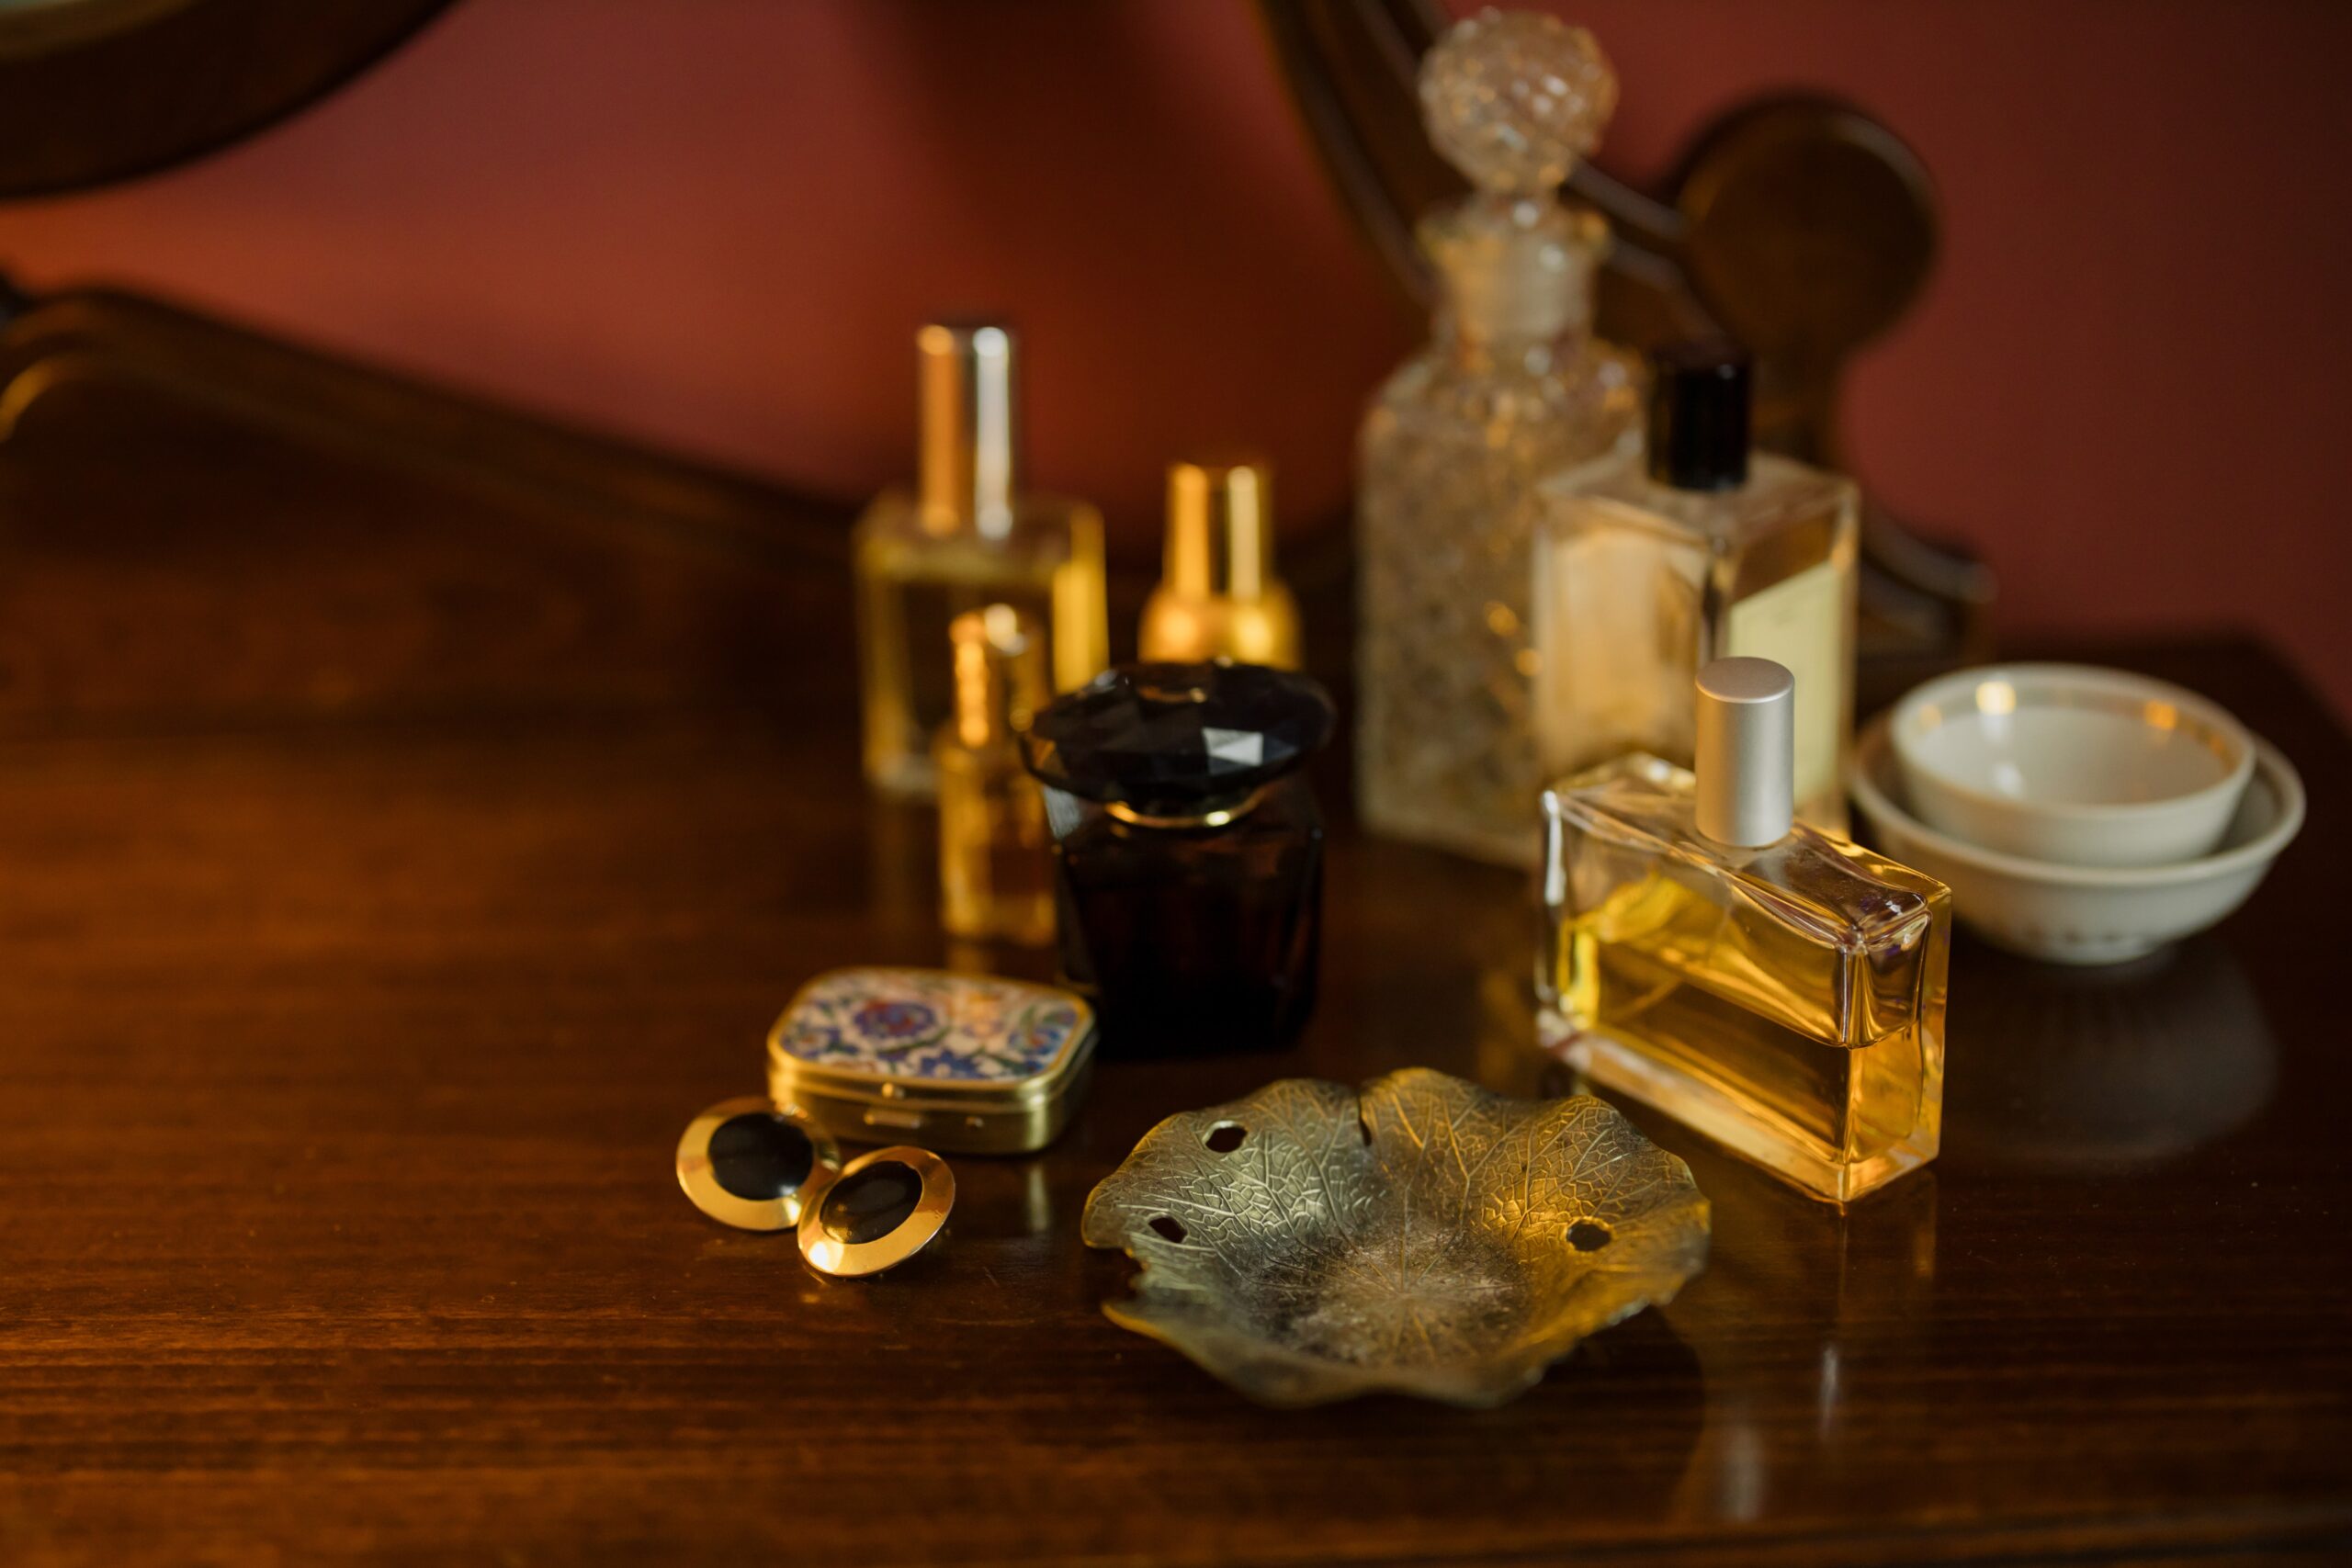 Perfume-bottles-on-the-table